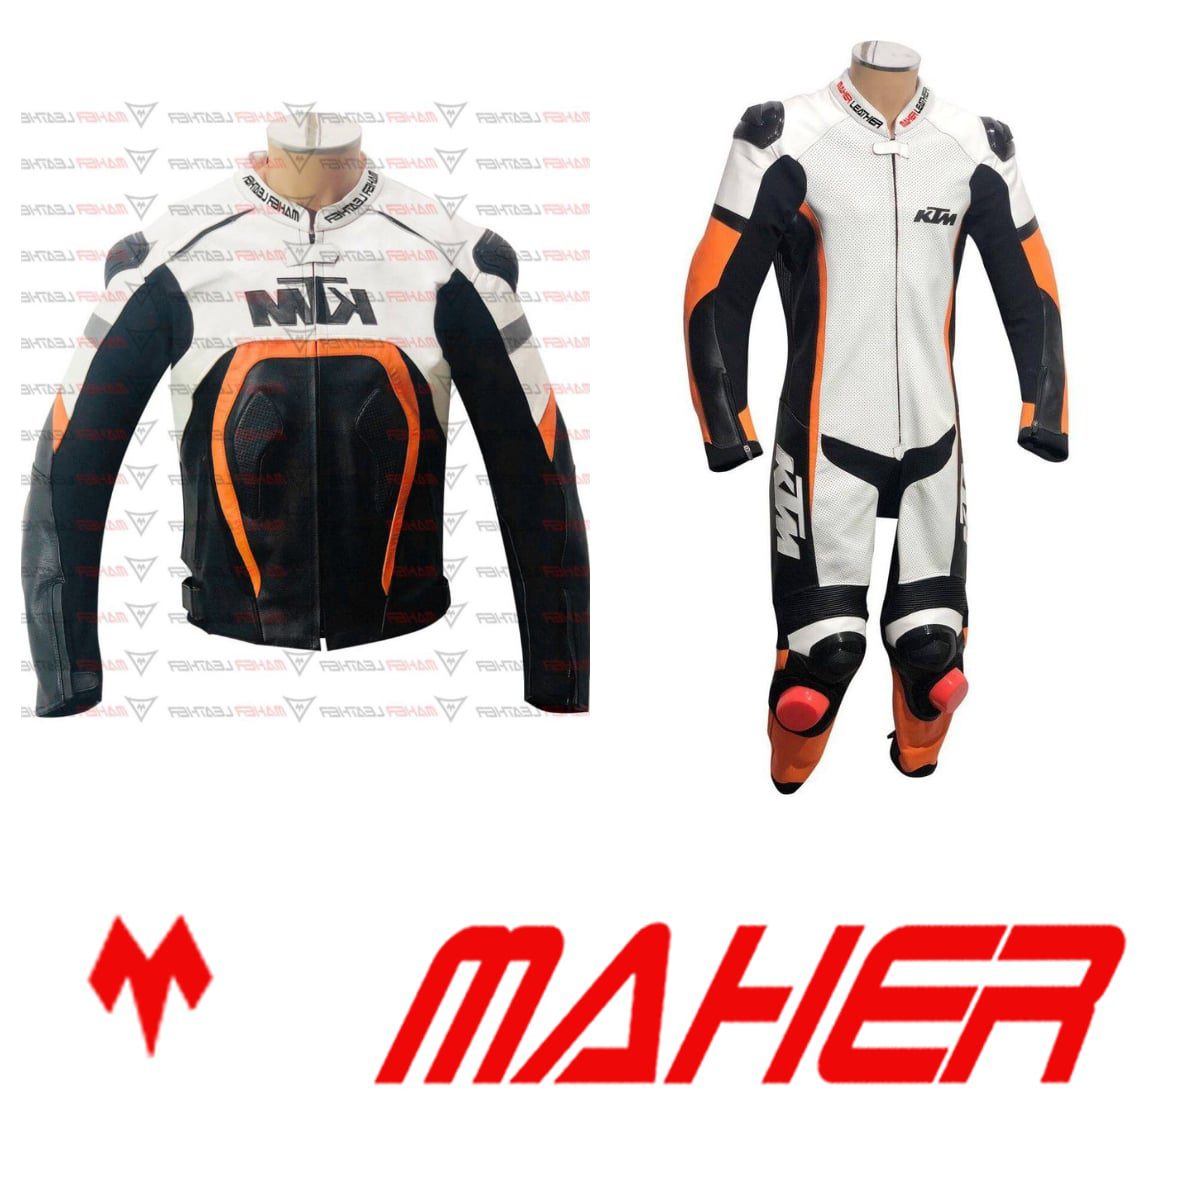 Differentiate between one piece and two piece Motorcycle suit